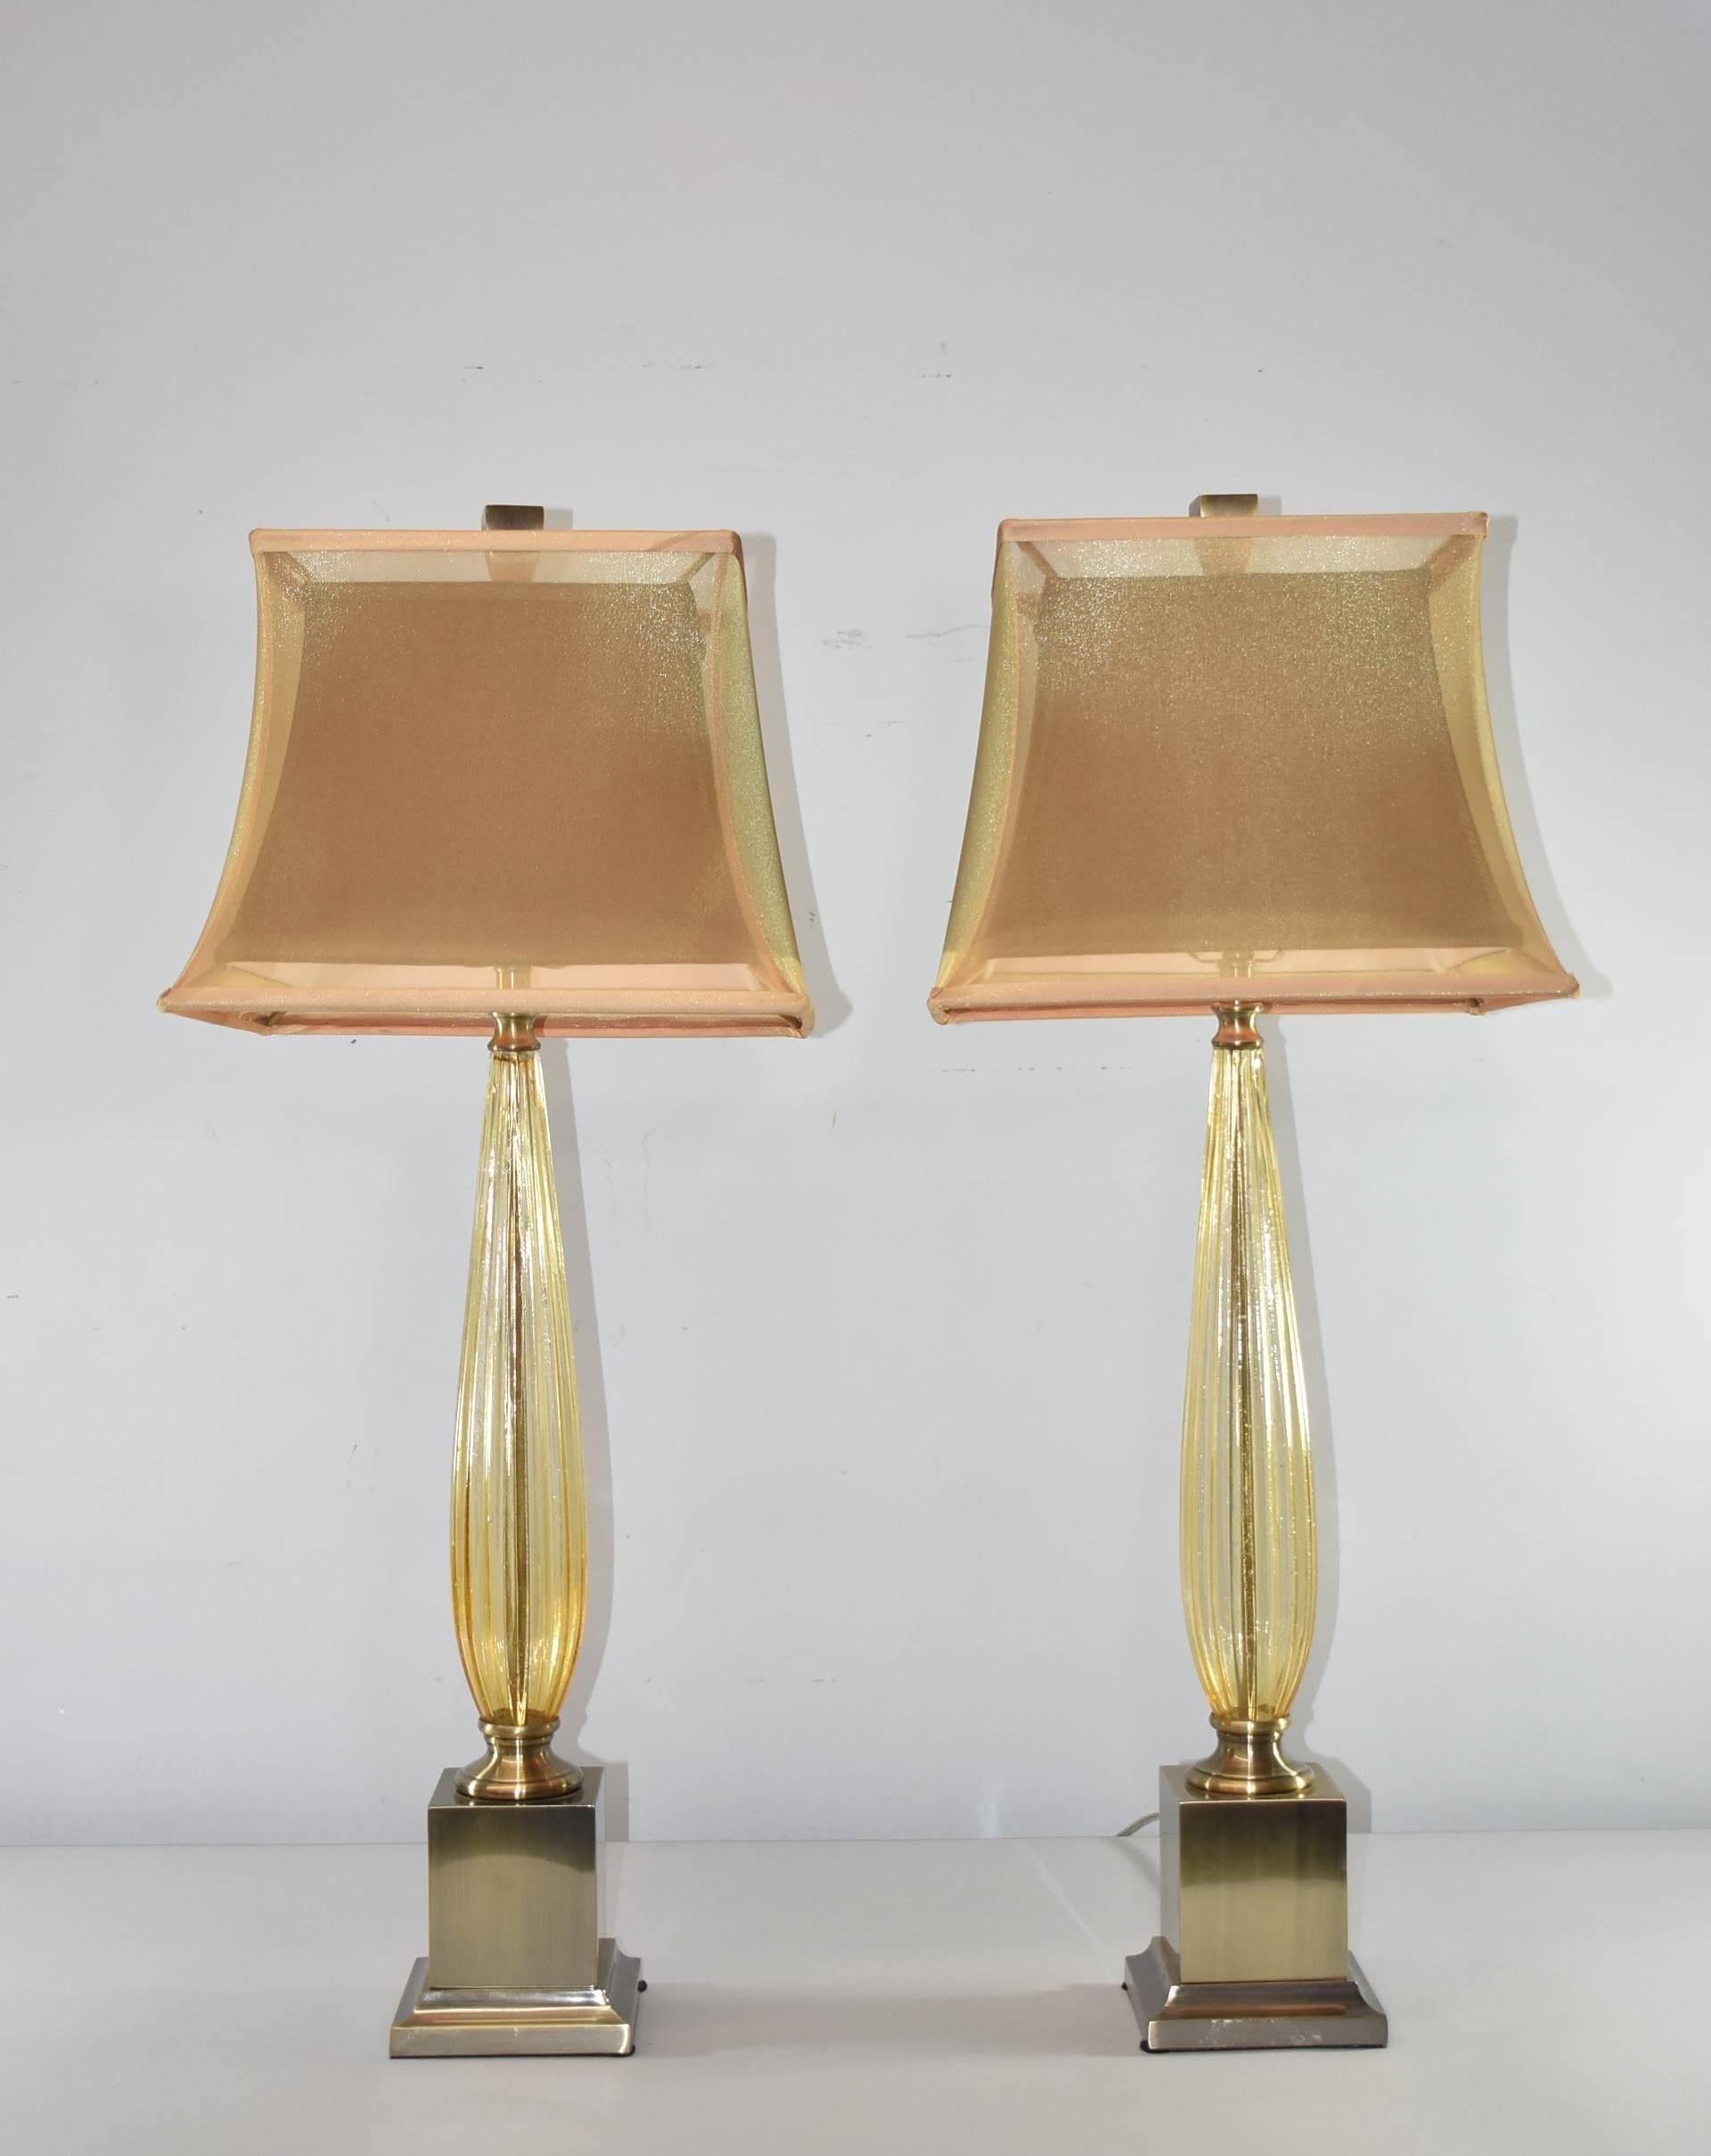 A stunning pair of table lamps by John Richard. Base features antiqued / brushed brass with fluted amber glass. Each lamp is topped with John Richard's signature double shade with translucent silk outer layer. Heavy brass finial finishes the look.